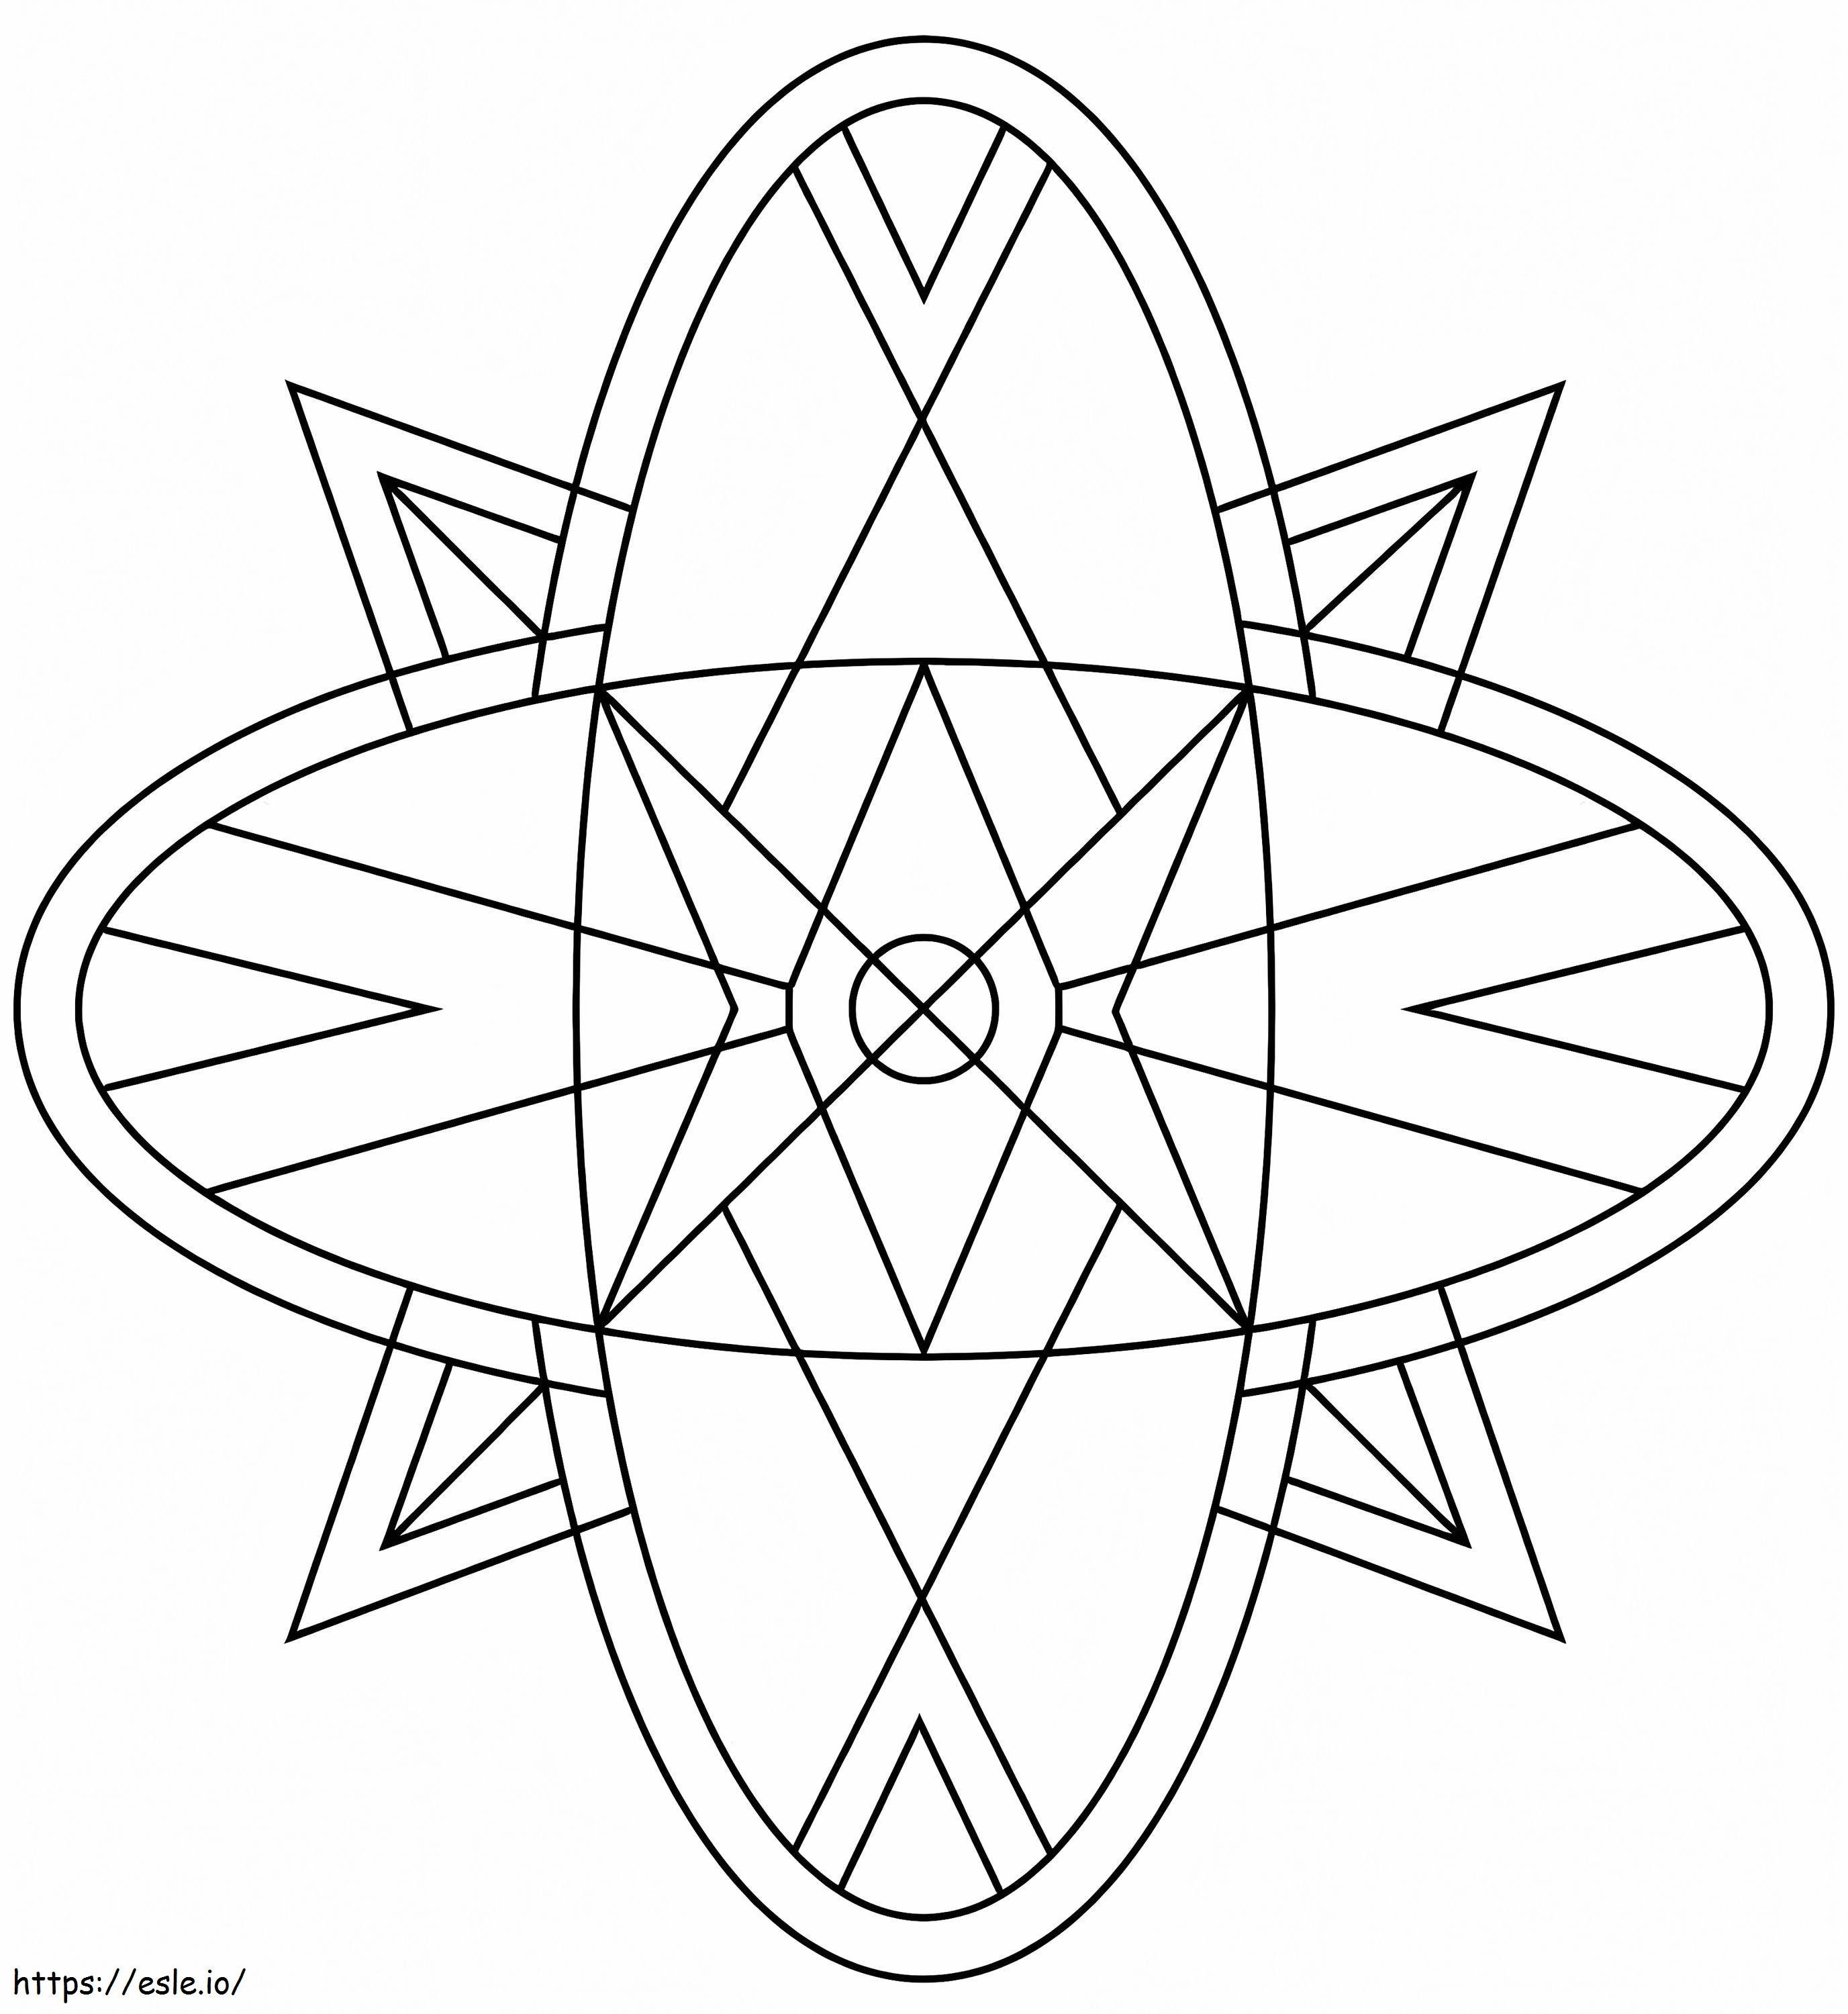 Kaleidoscope 13 coloring page